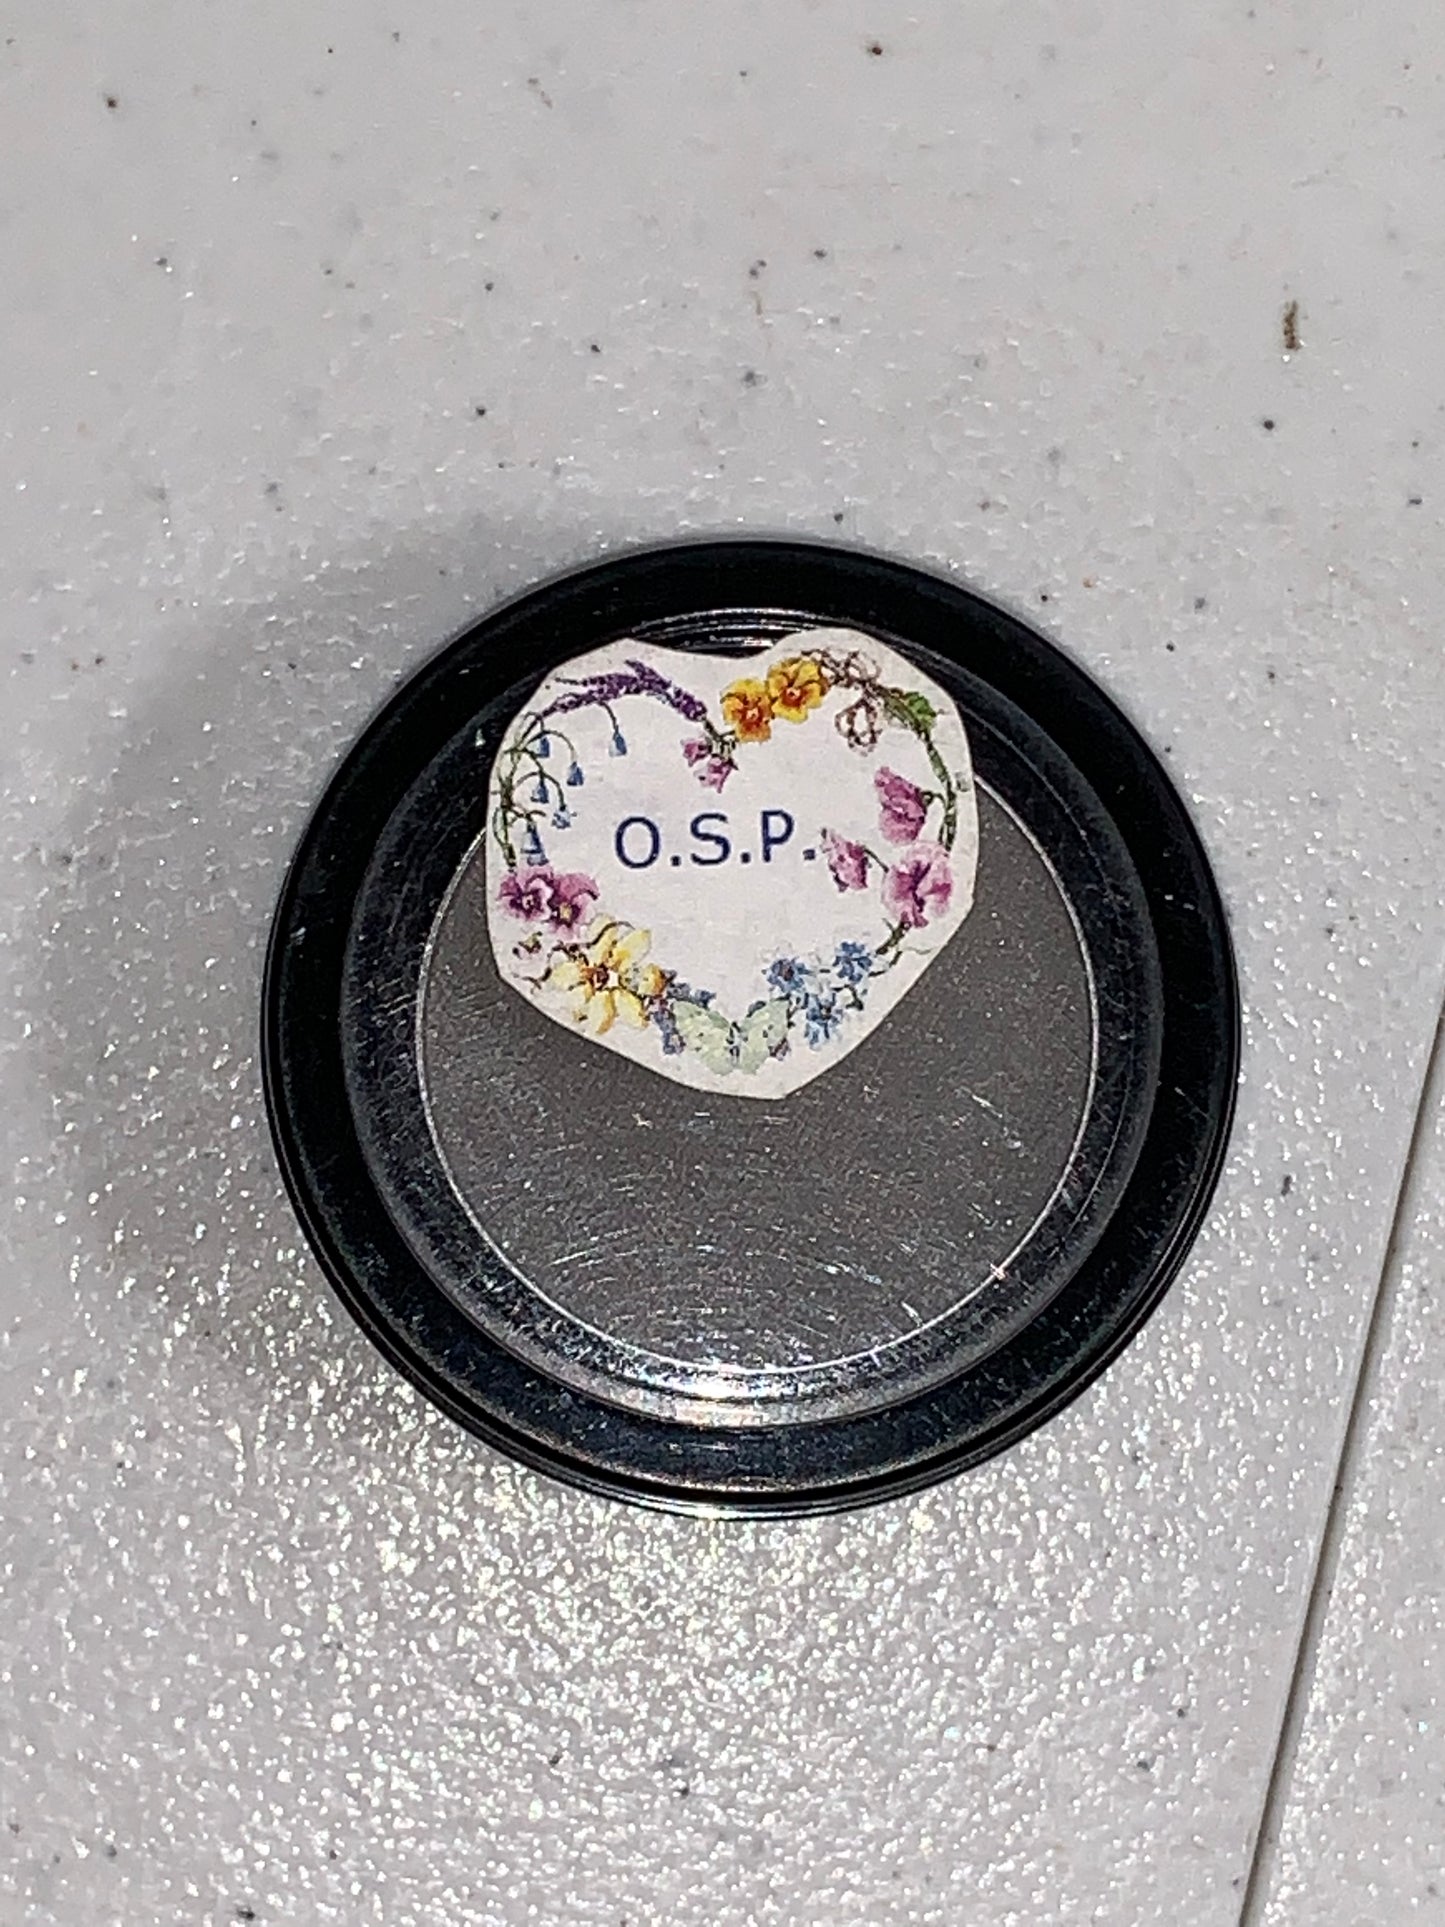 OSP Cosmetics Frosted Eye Shadow